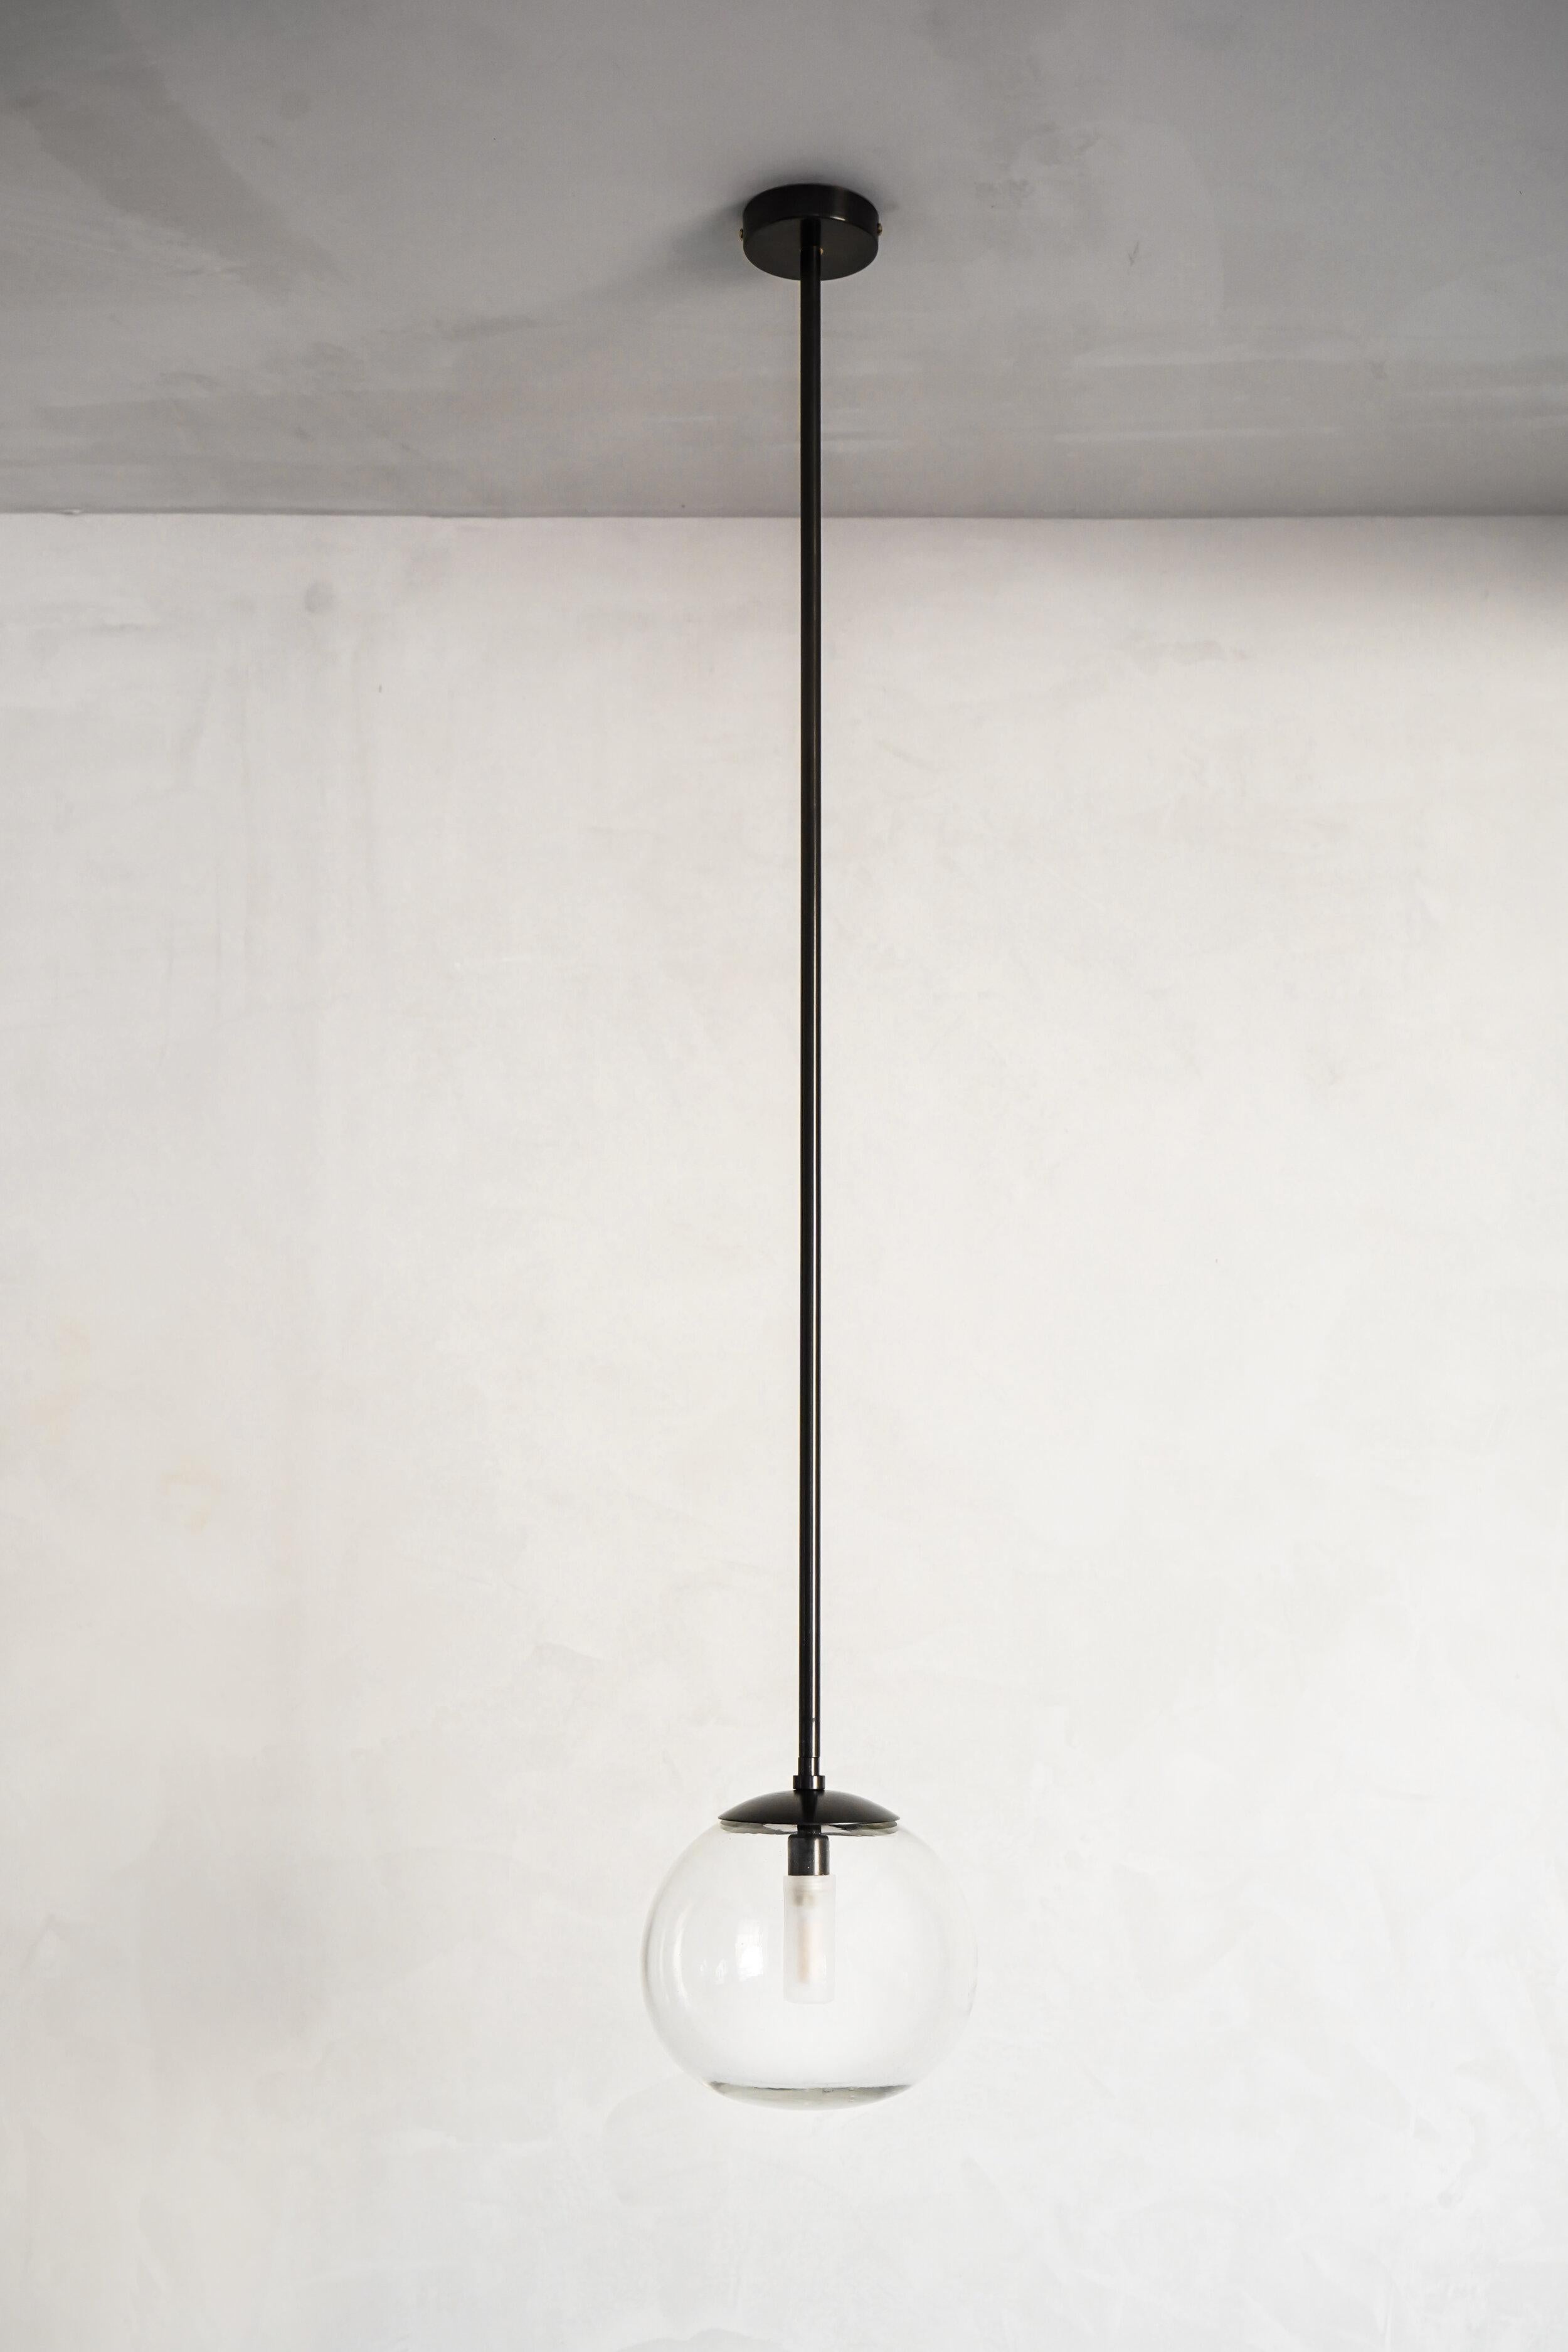 Pendant Ball Tube 18 by Contain
Dimensions: D 18 x H 100cm (custom length).
Materials: Brass tube or cable, 3D printed PLA structure and blown glass from local production.
Available in different finishes and dimensions.

All our lamps can be wired